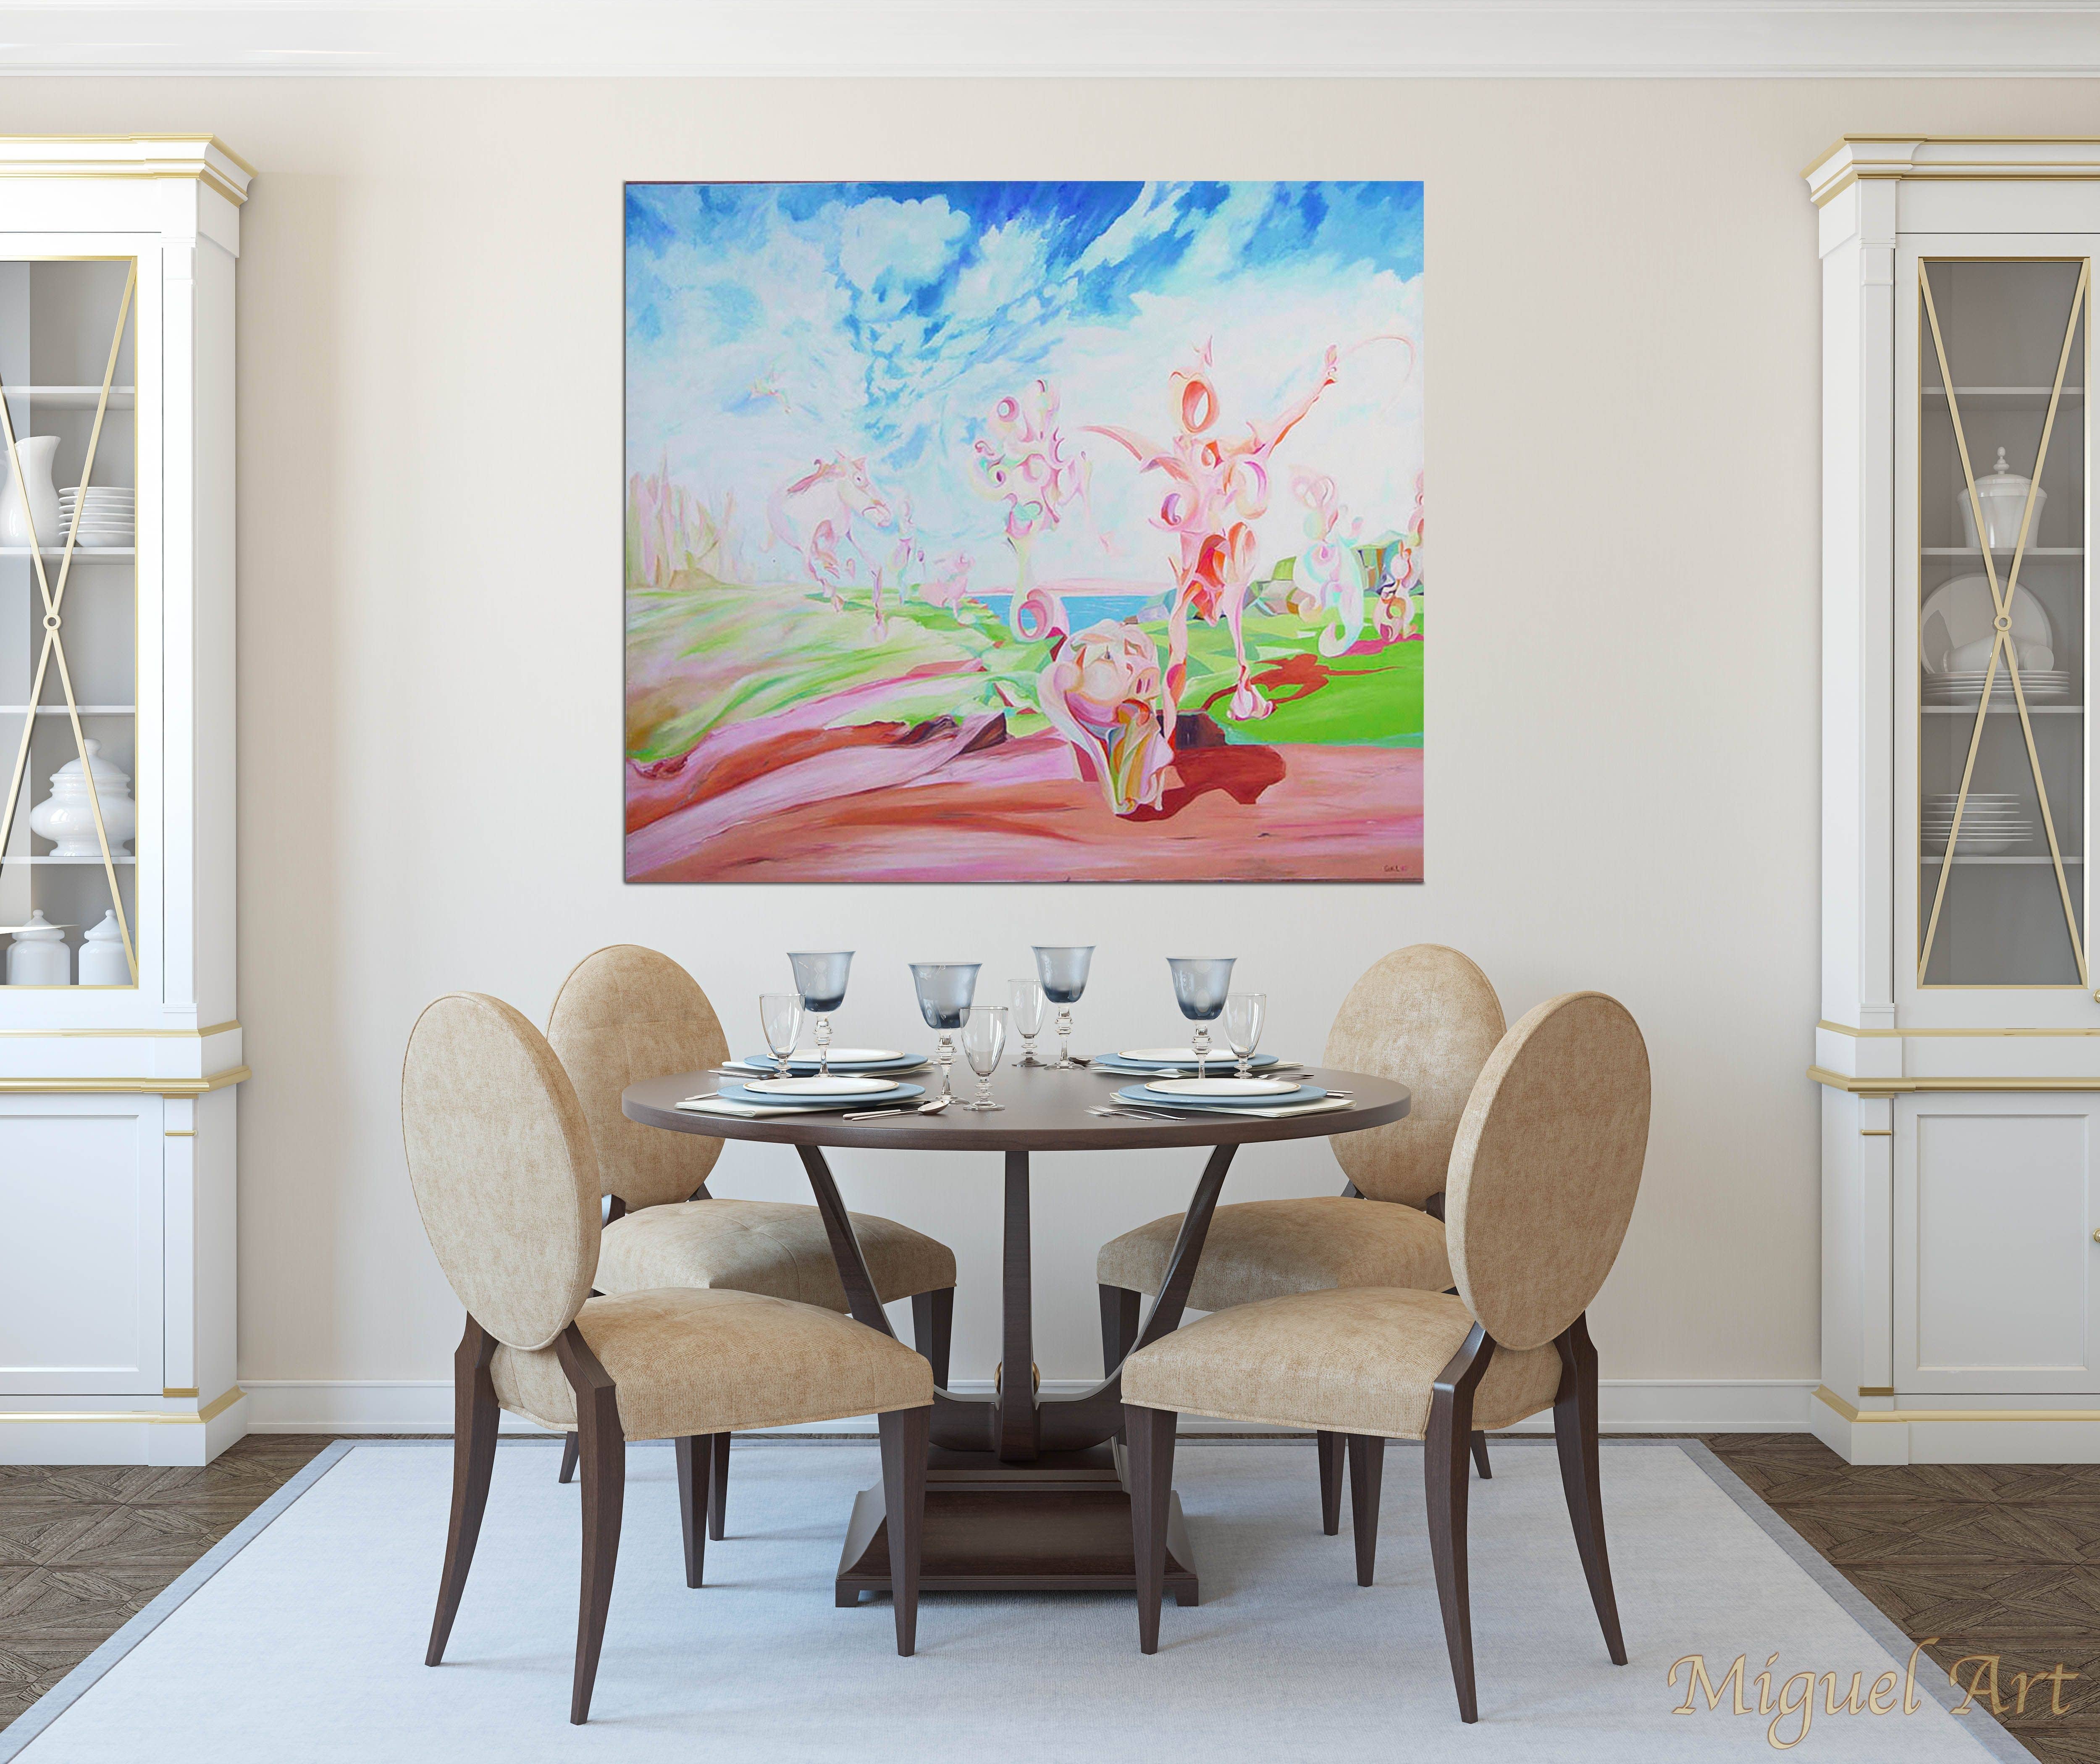 Painting of Sur displayed in a dining room on a cream wall